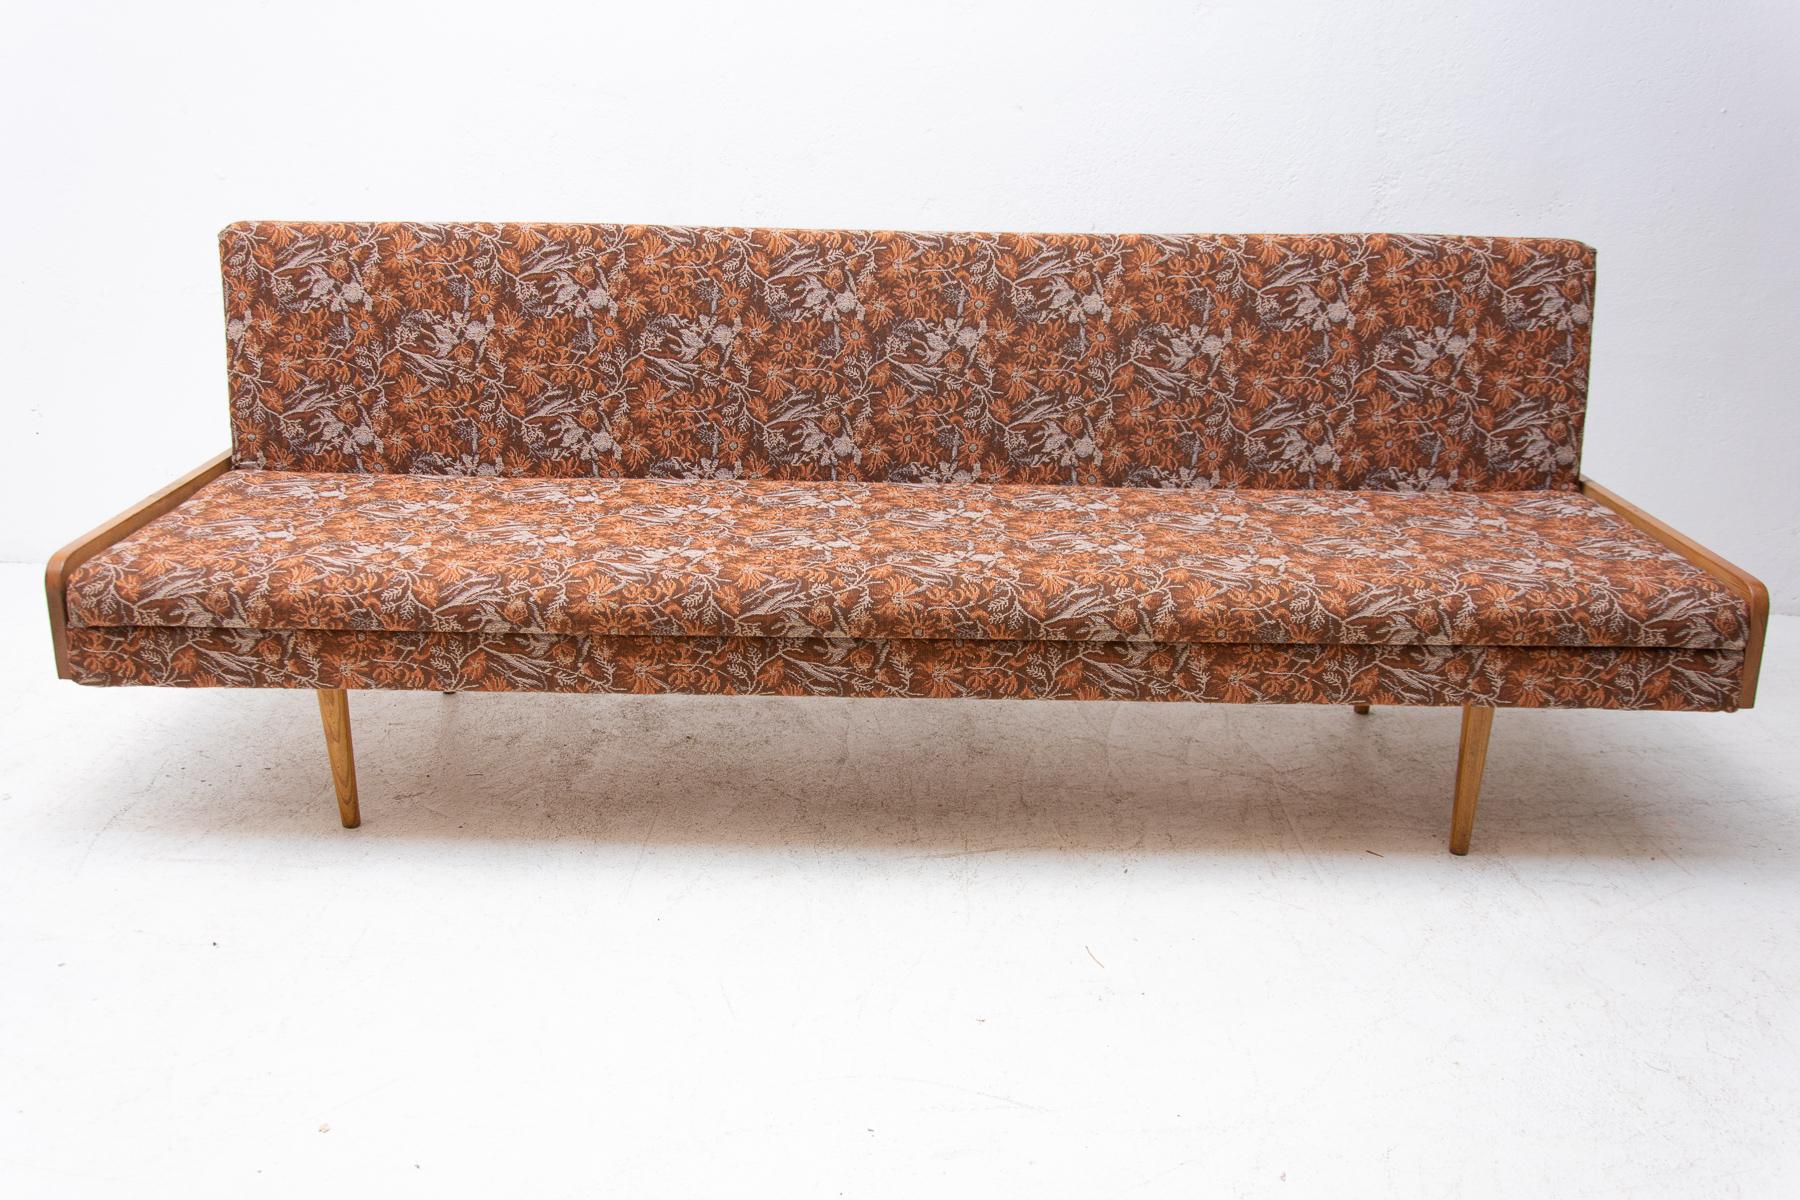 Very interesting mid century couch/sofabed, made in the former Czechoslovakia in the 1960´s. Material: beech wood, fabric. The sofa is in very good vintage condition.

Measures: Sleeping area: 194×85 cm

Seat height: 37 cm.